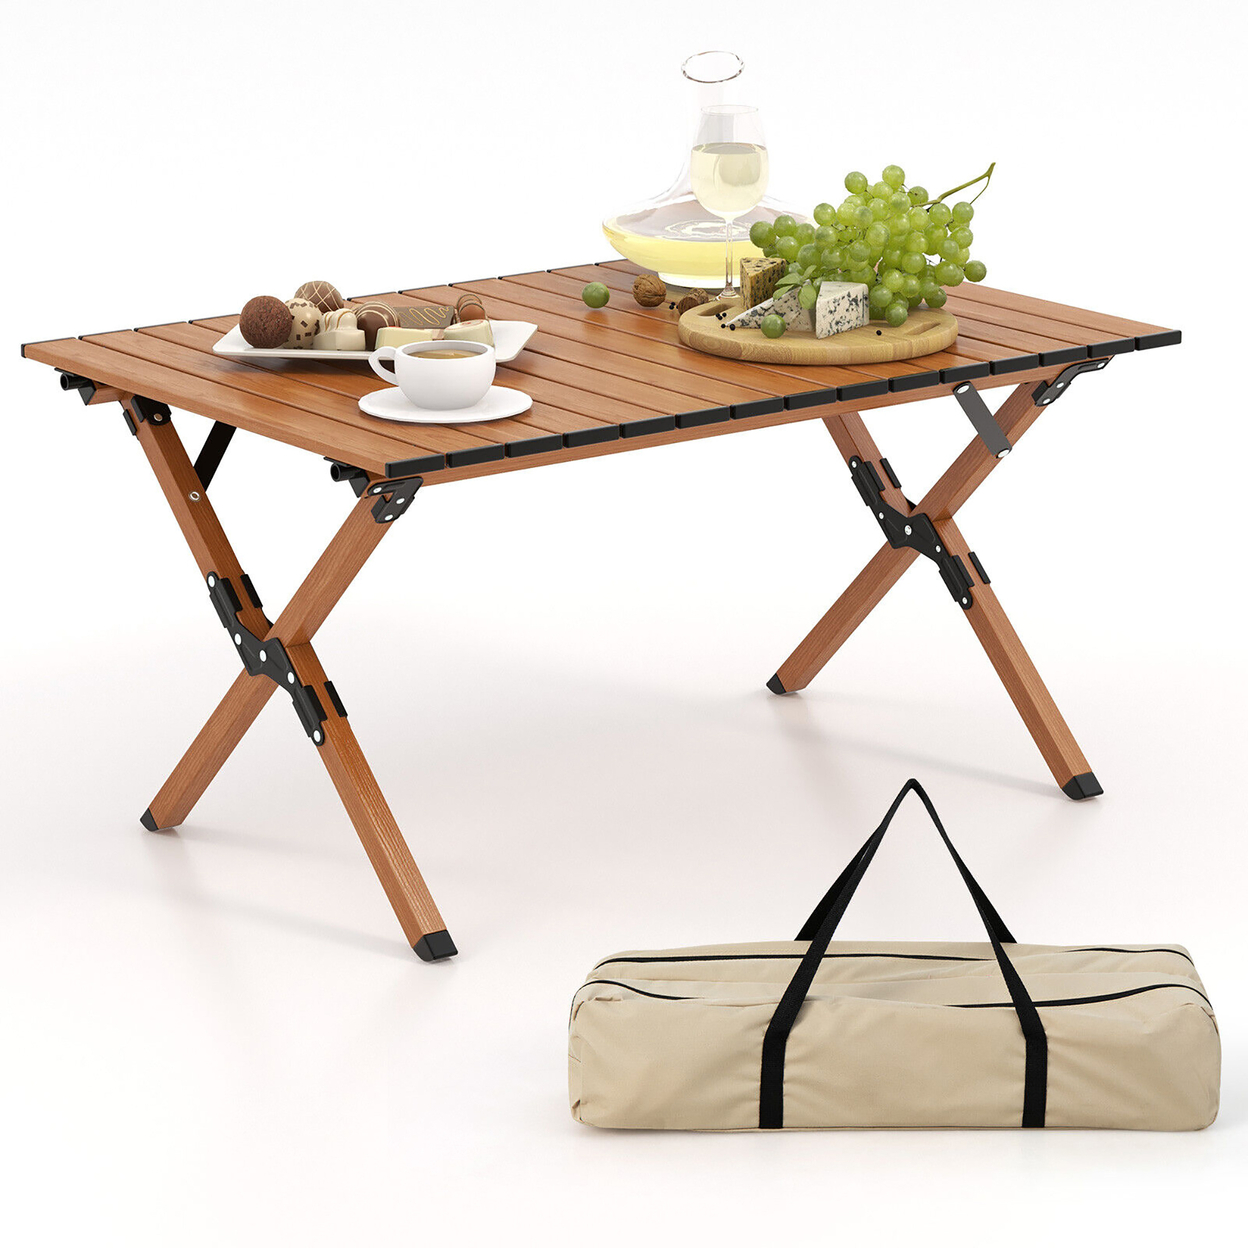 Folding Aluminum Camping Table W/ Carry Bag Roll-Up Picnic Table W/ Wood Grain